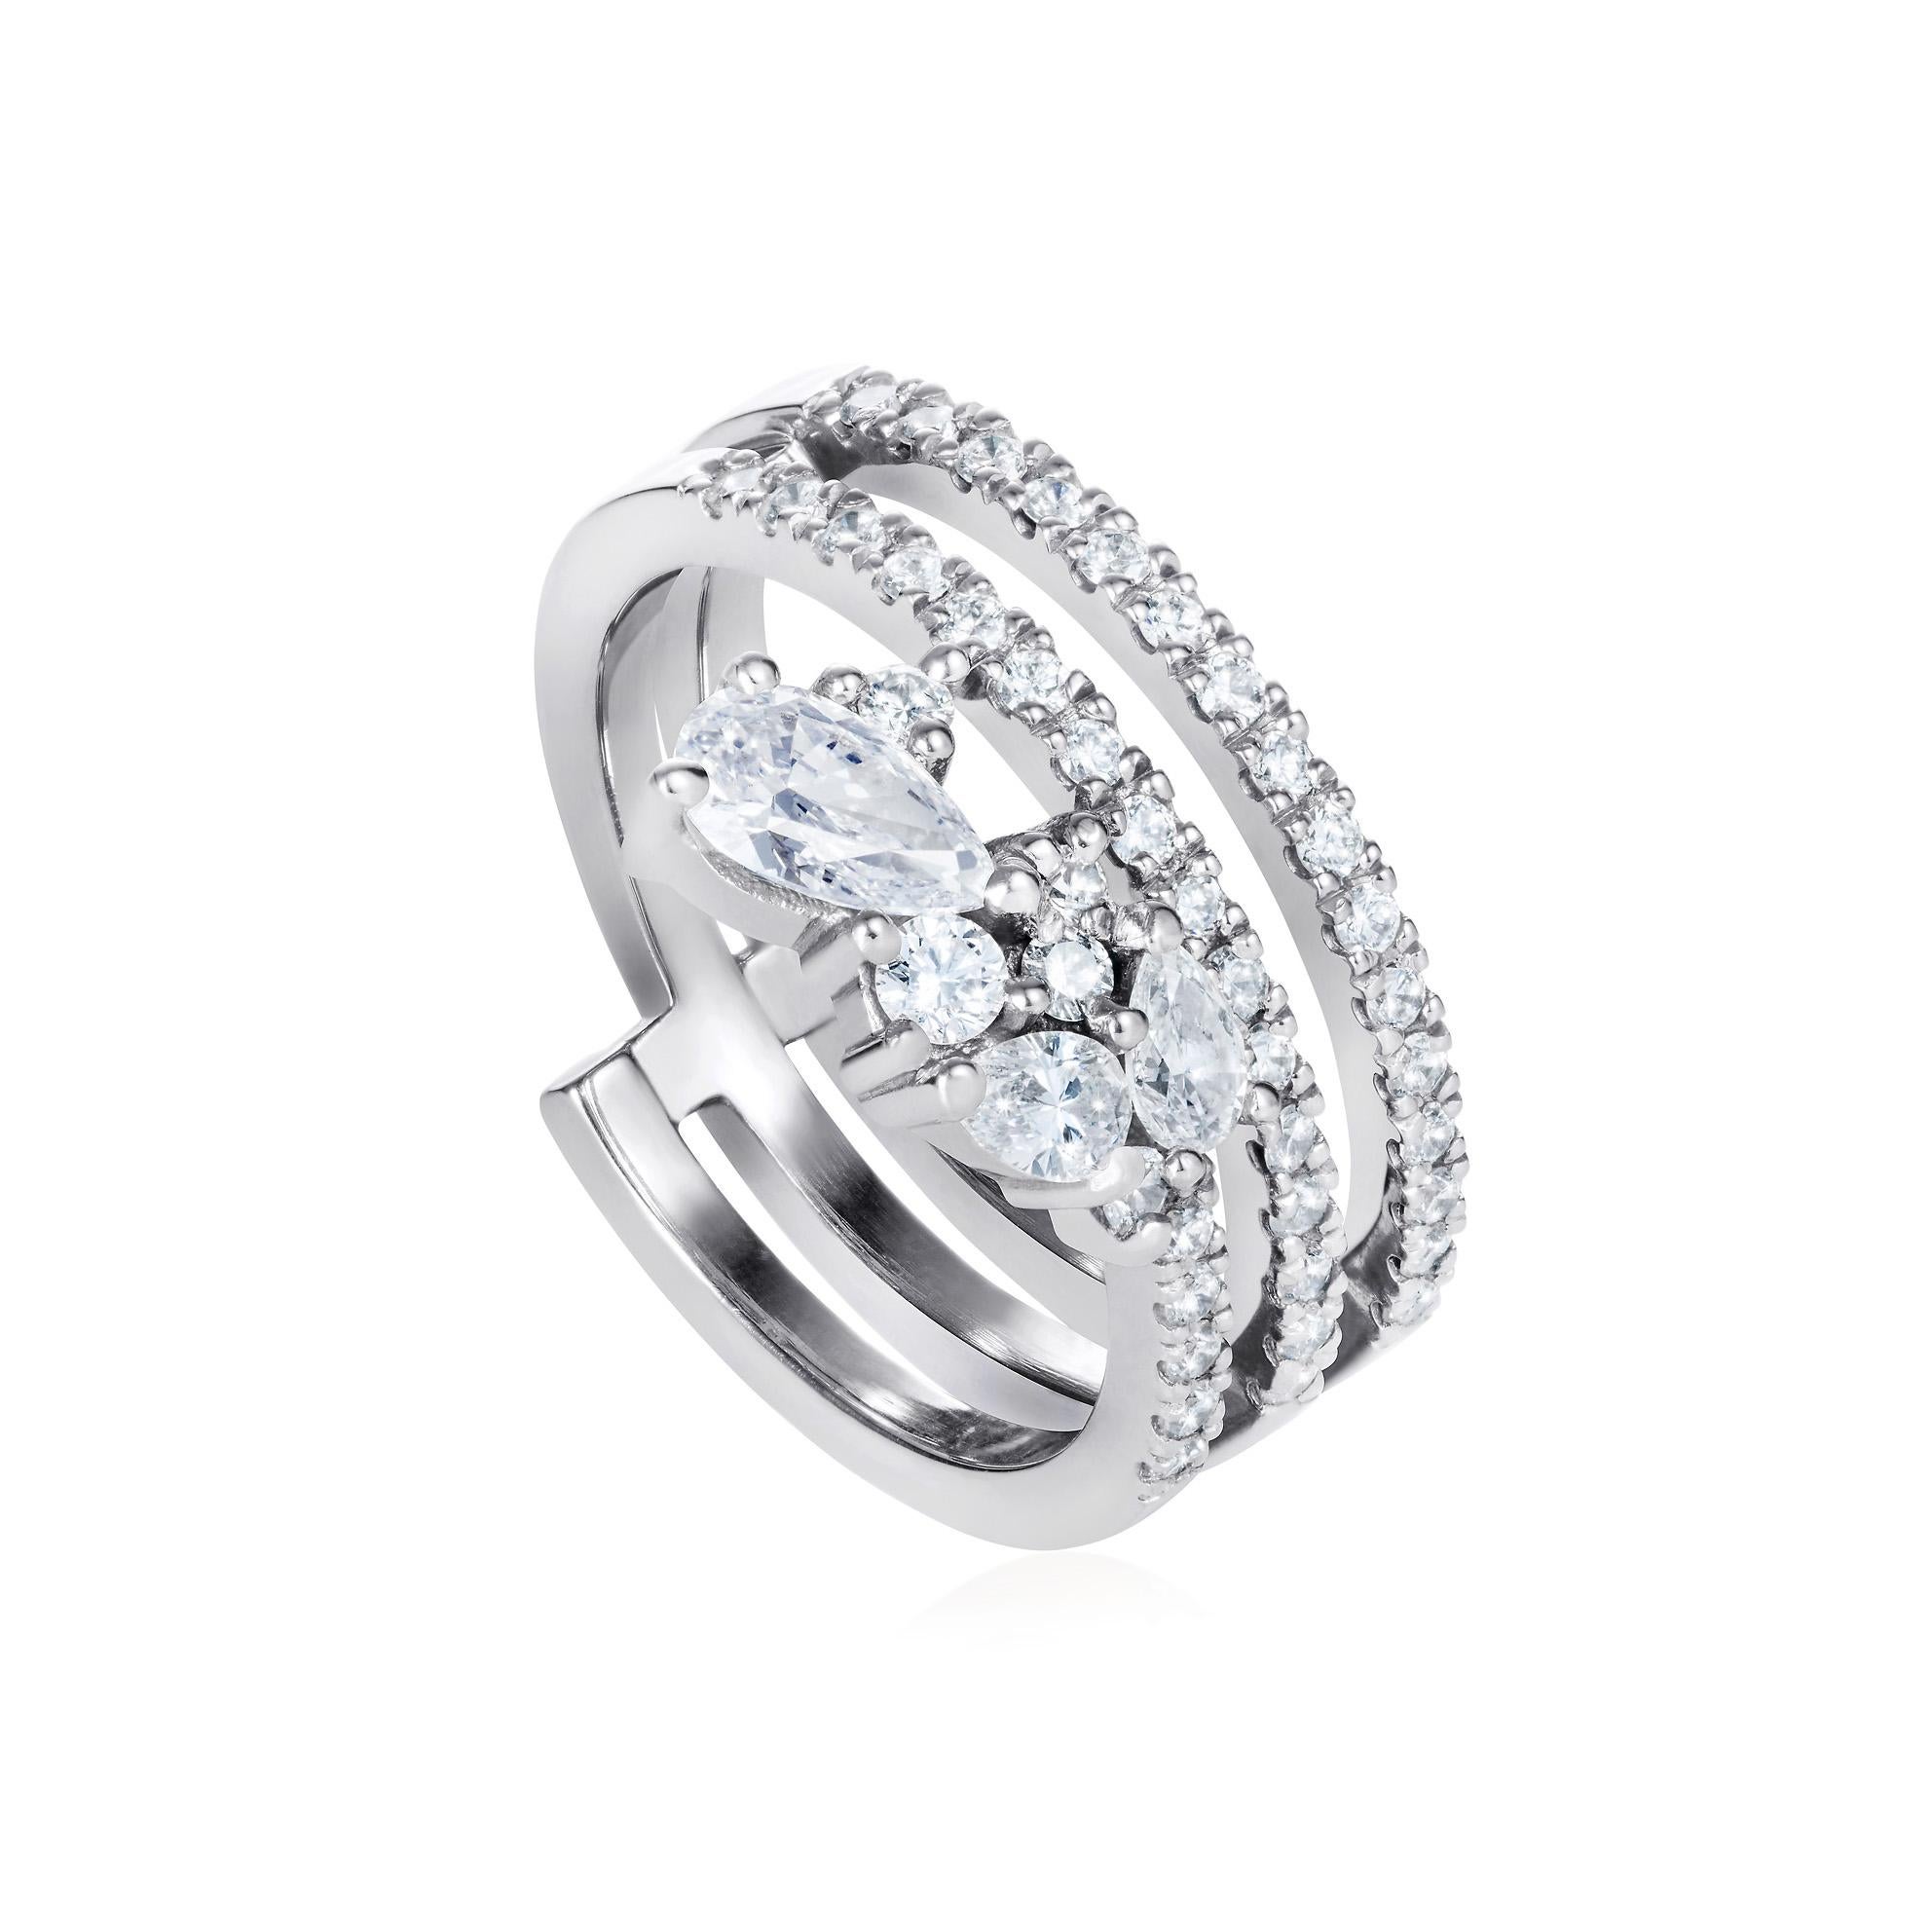 The two  fine white gold diamond studded bands of this ring give the structure that then ‘dissolves’ into  7 beautiful larger stones that flow into a soft organic shape.

This ring can be worn with the fall of stones going down the hand or up the